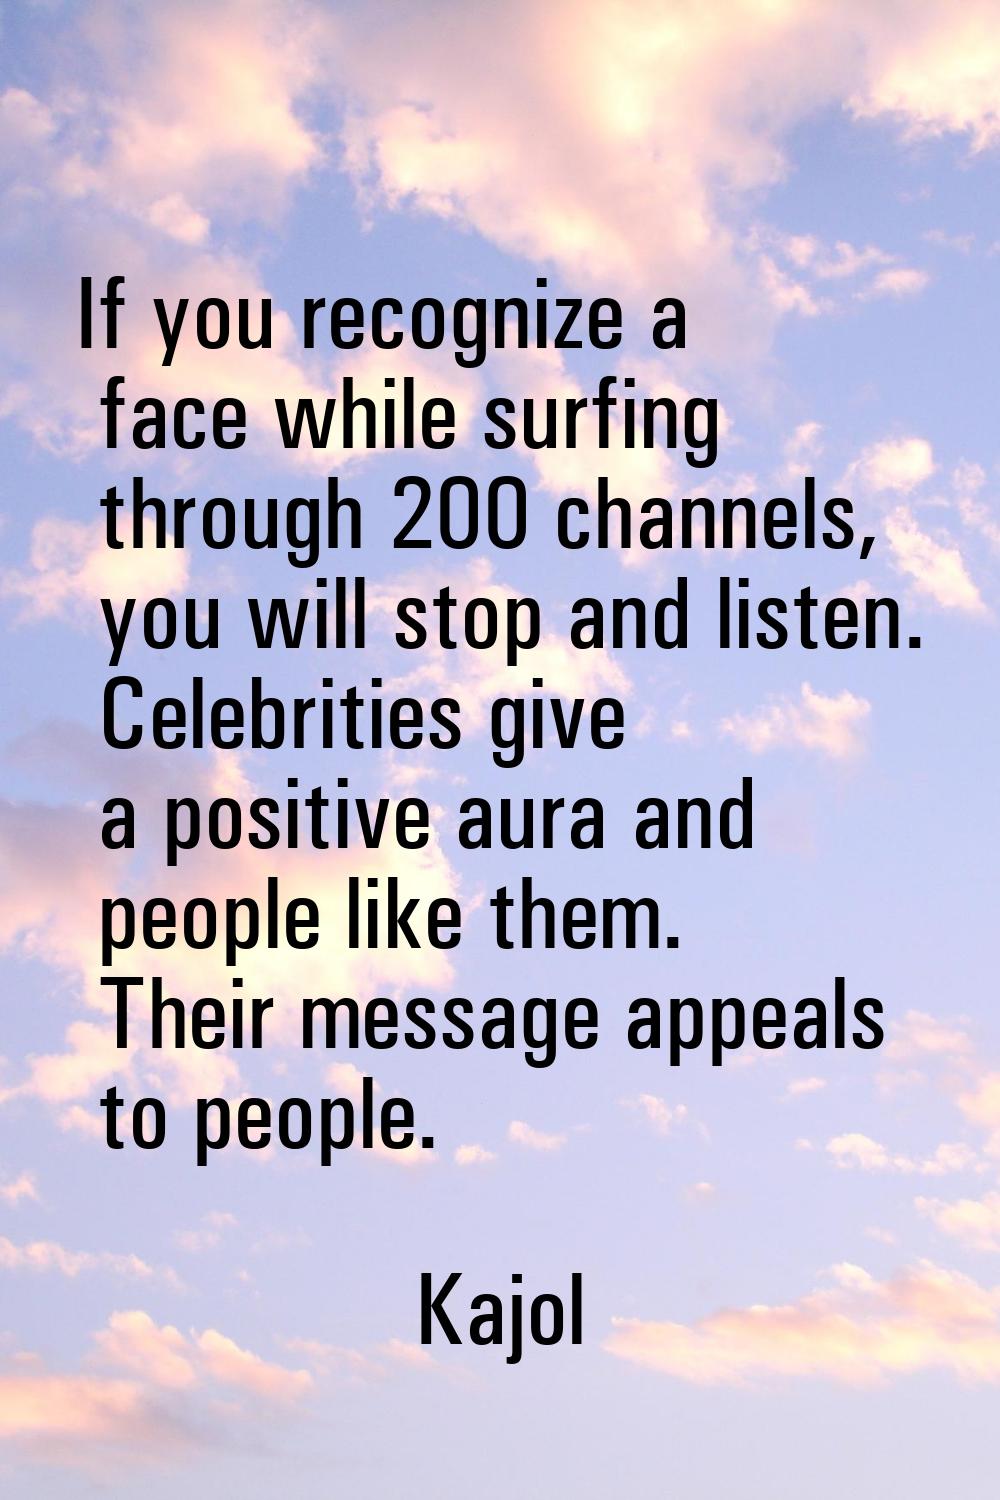 If you recognize a face while surfing through 200 channels, you will stop and listen. Celebrities g